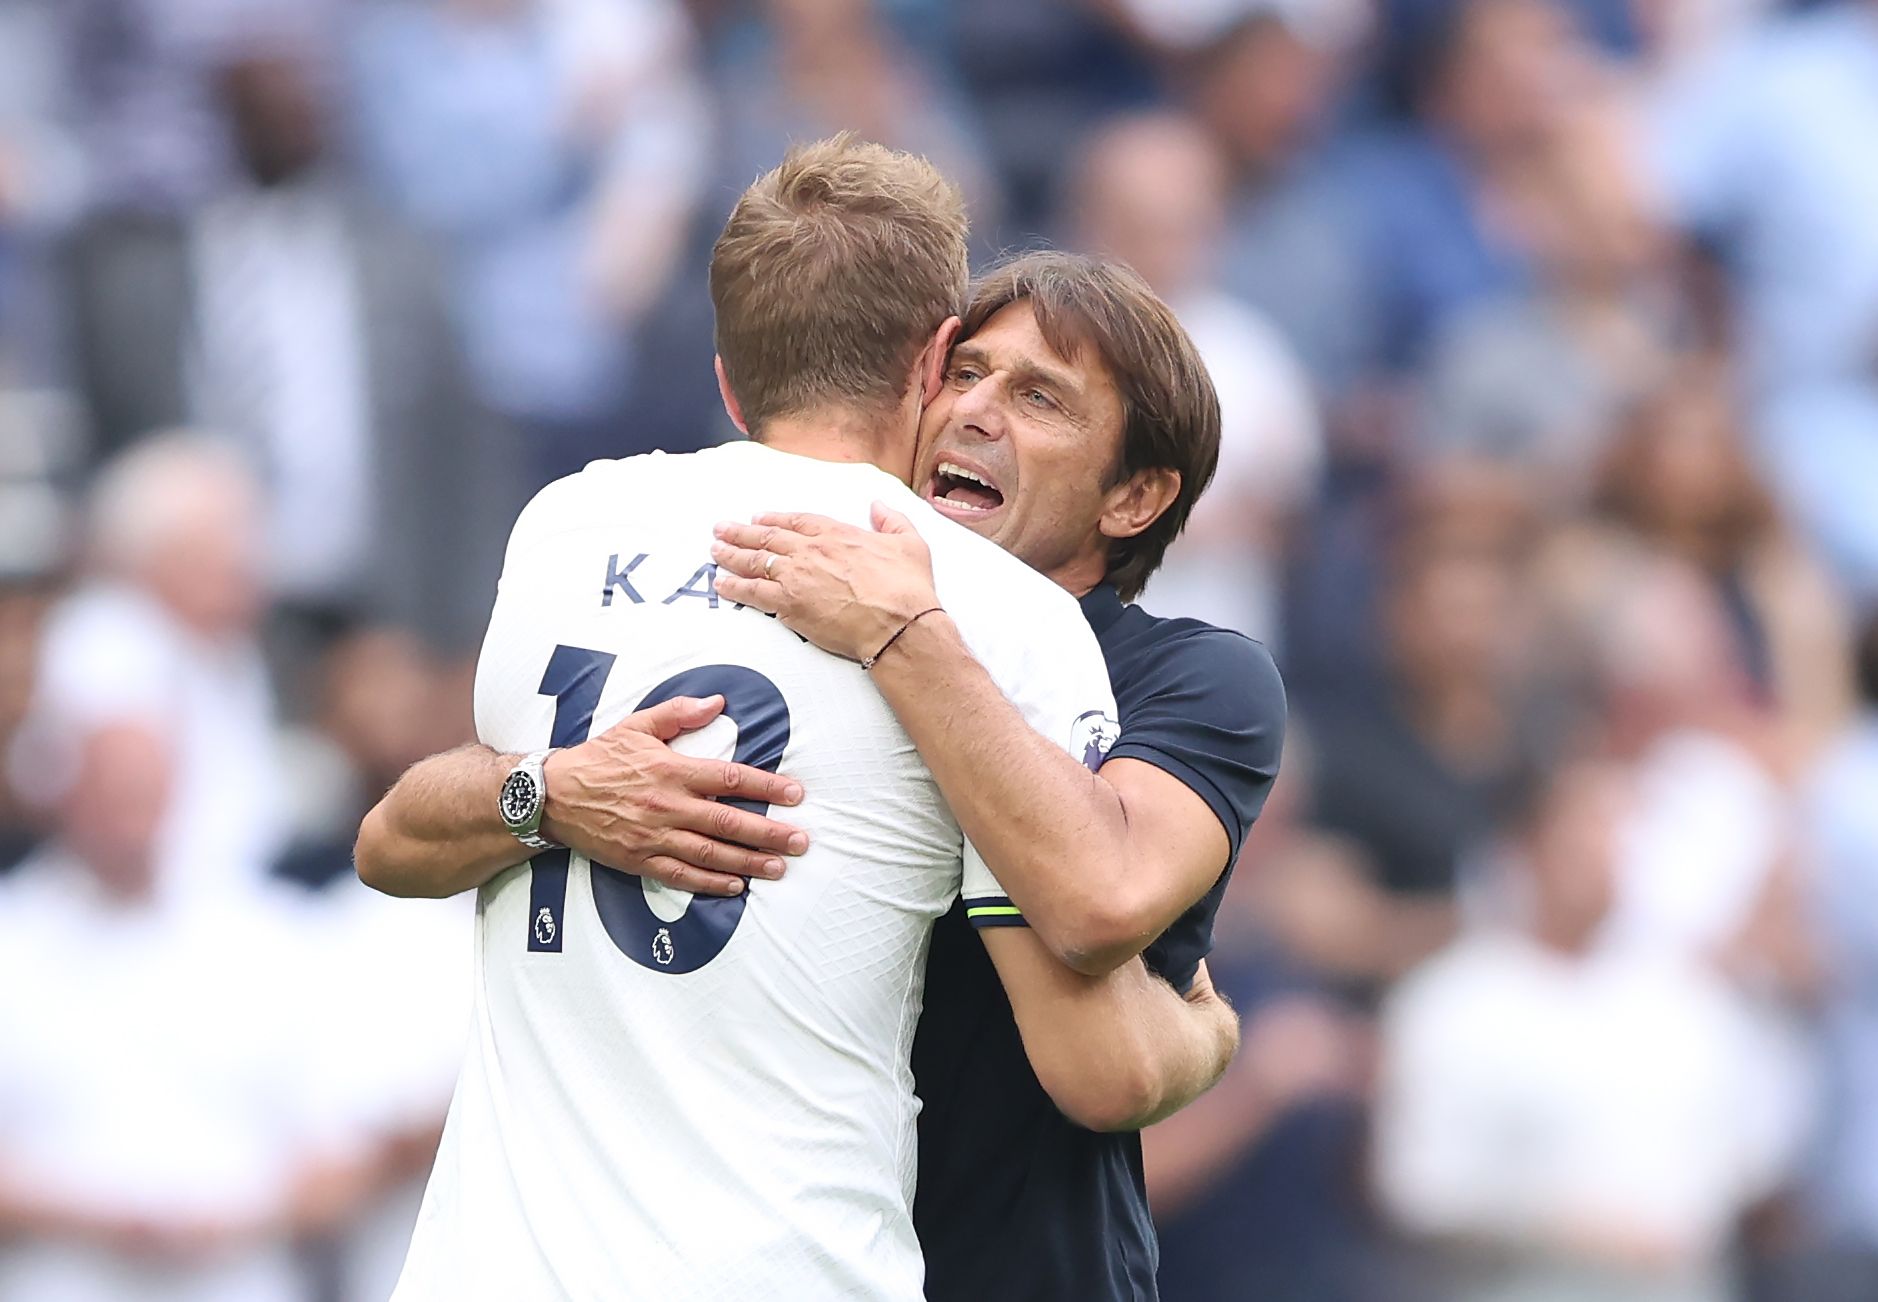 Harry Kane of Tottenham Hotspur is embraced by Head Coach, Antonio Conte at the final whistle during the Premier League match between Tottenham Hotspur and Fulham FC at Tottenham Hotspur Stadium on September 03, 2022 in London, England.